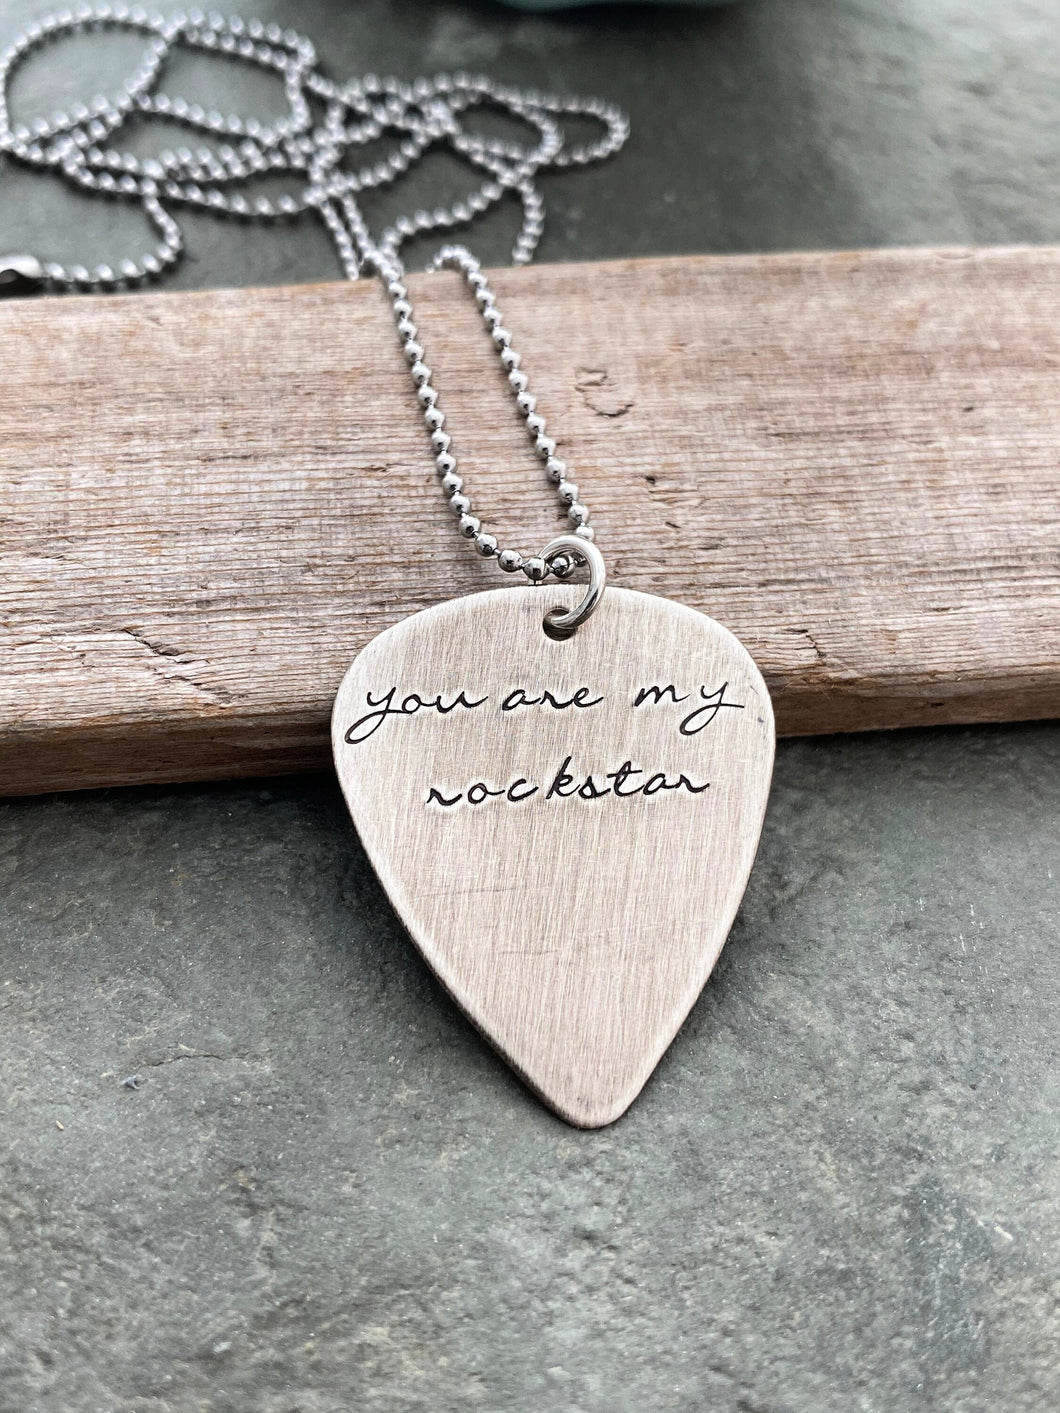 you are my rockstar - sterling silver guitar pick with stainless steel necklace chain - hand stamped pick - gift for boyfriend girlfriend